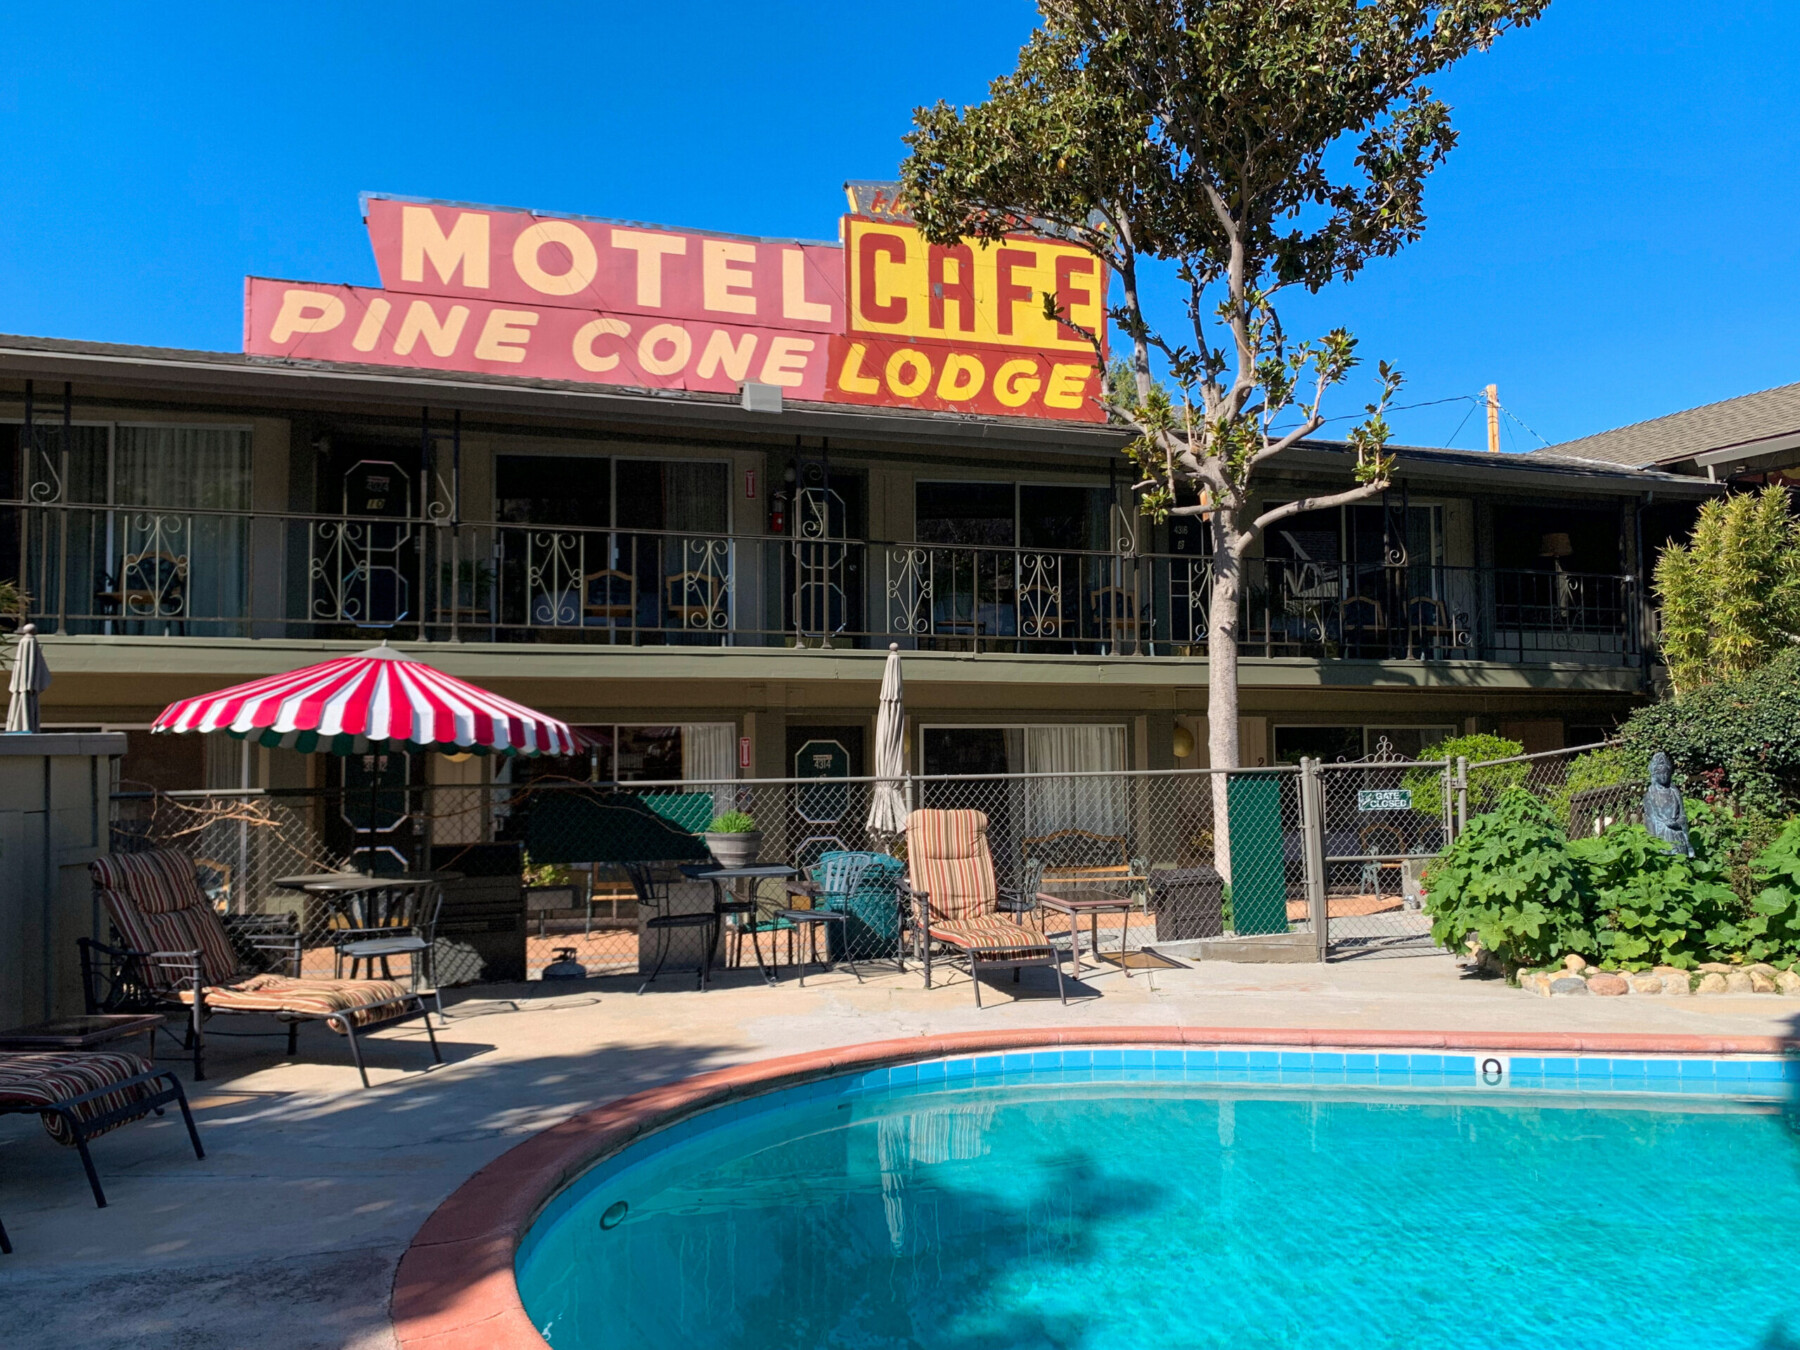 Poolside view of small motel called Piazza's Pine Cone Inn in Kernville, California.